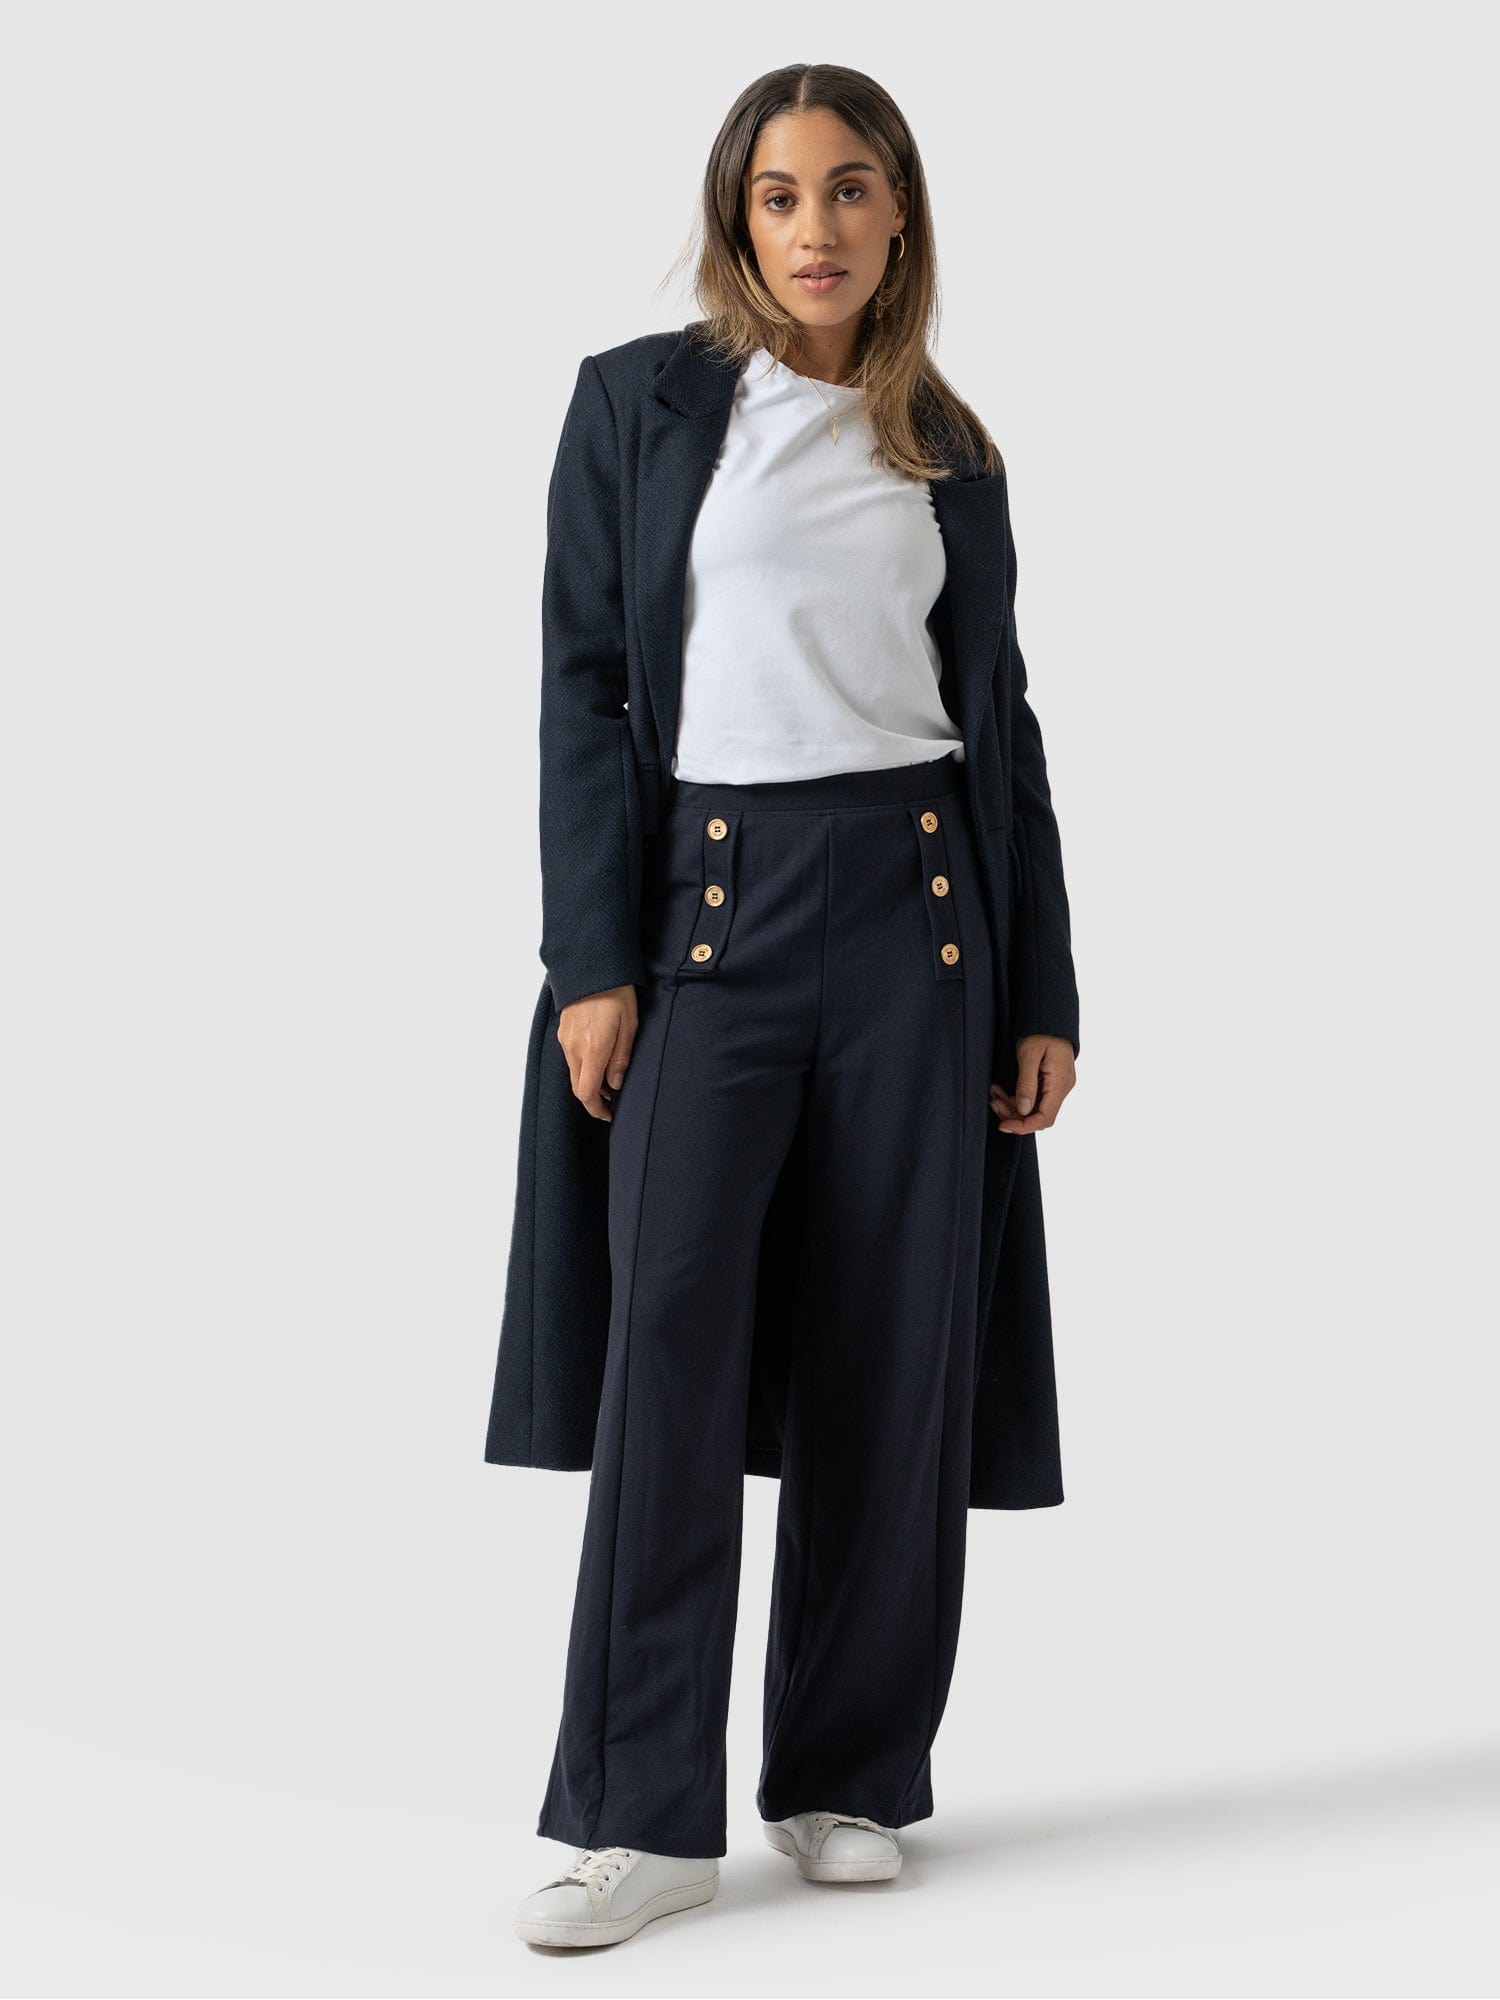 Work Clothes for Women |Shirts, Accessories, Skirts & Trousers | Hawes &  Curtis UK